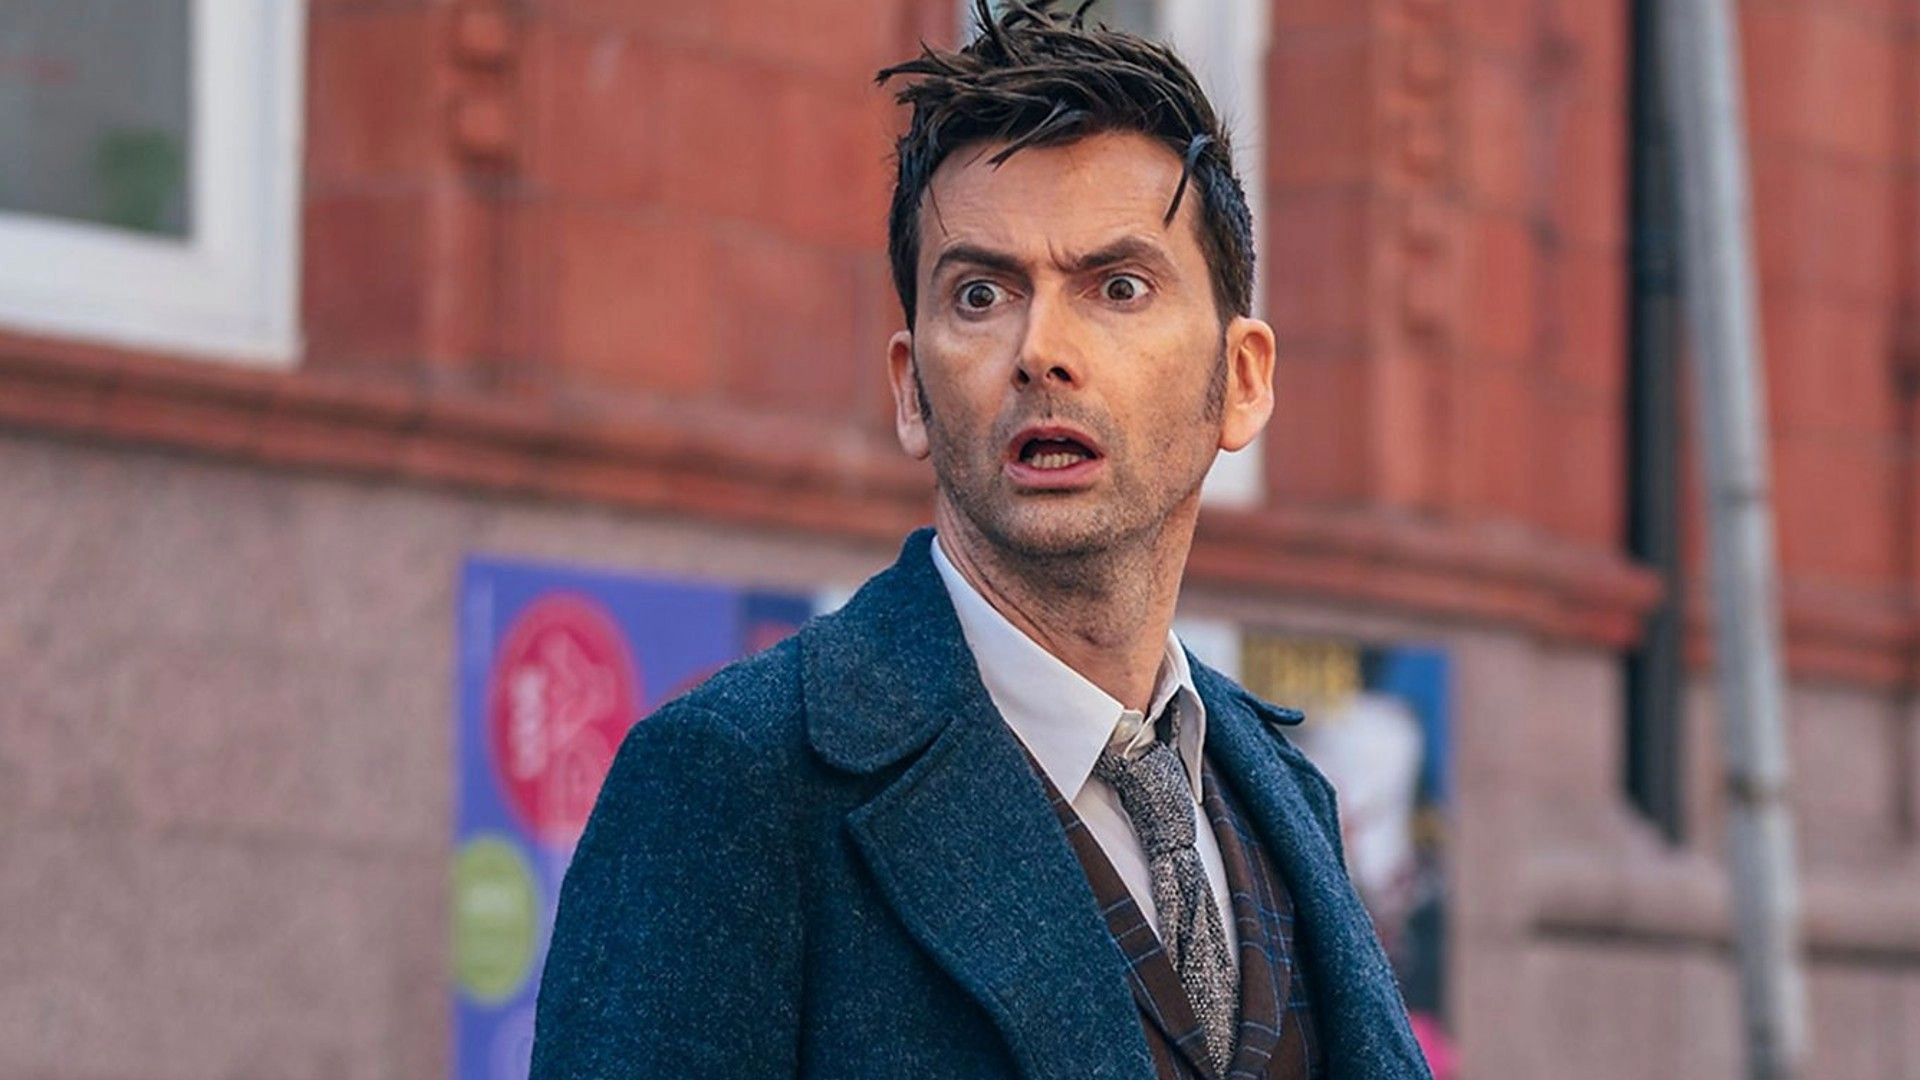 Doctor Who Drops 800 Episodes Online, Time-Travels to Accessibility